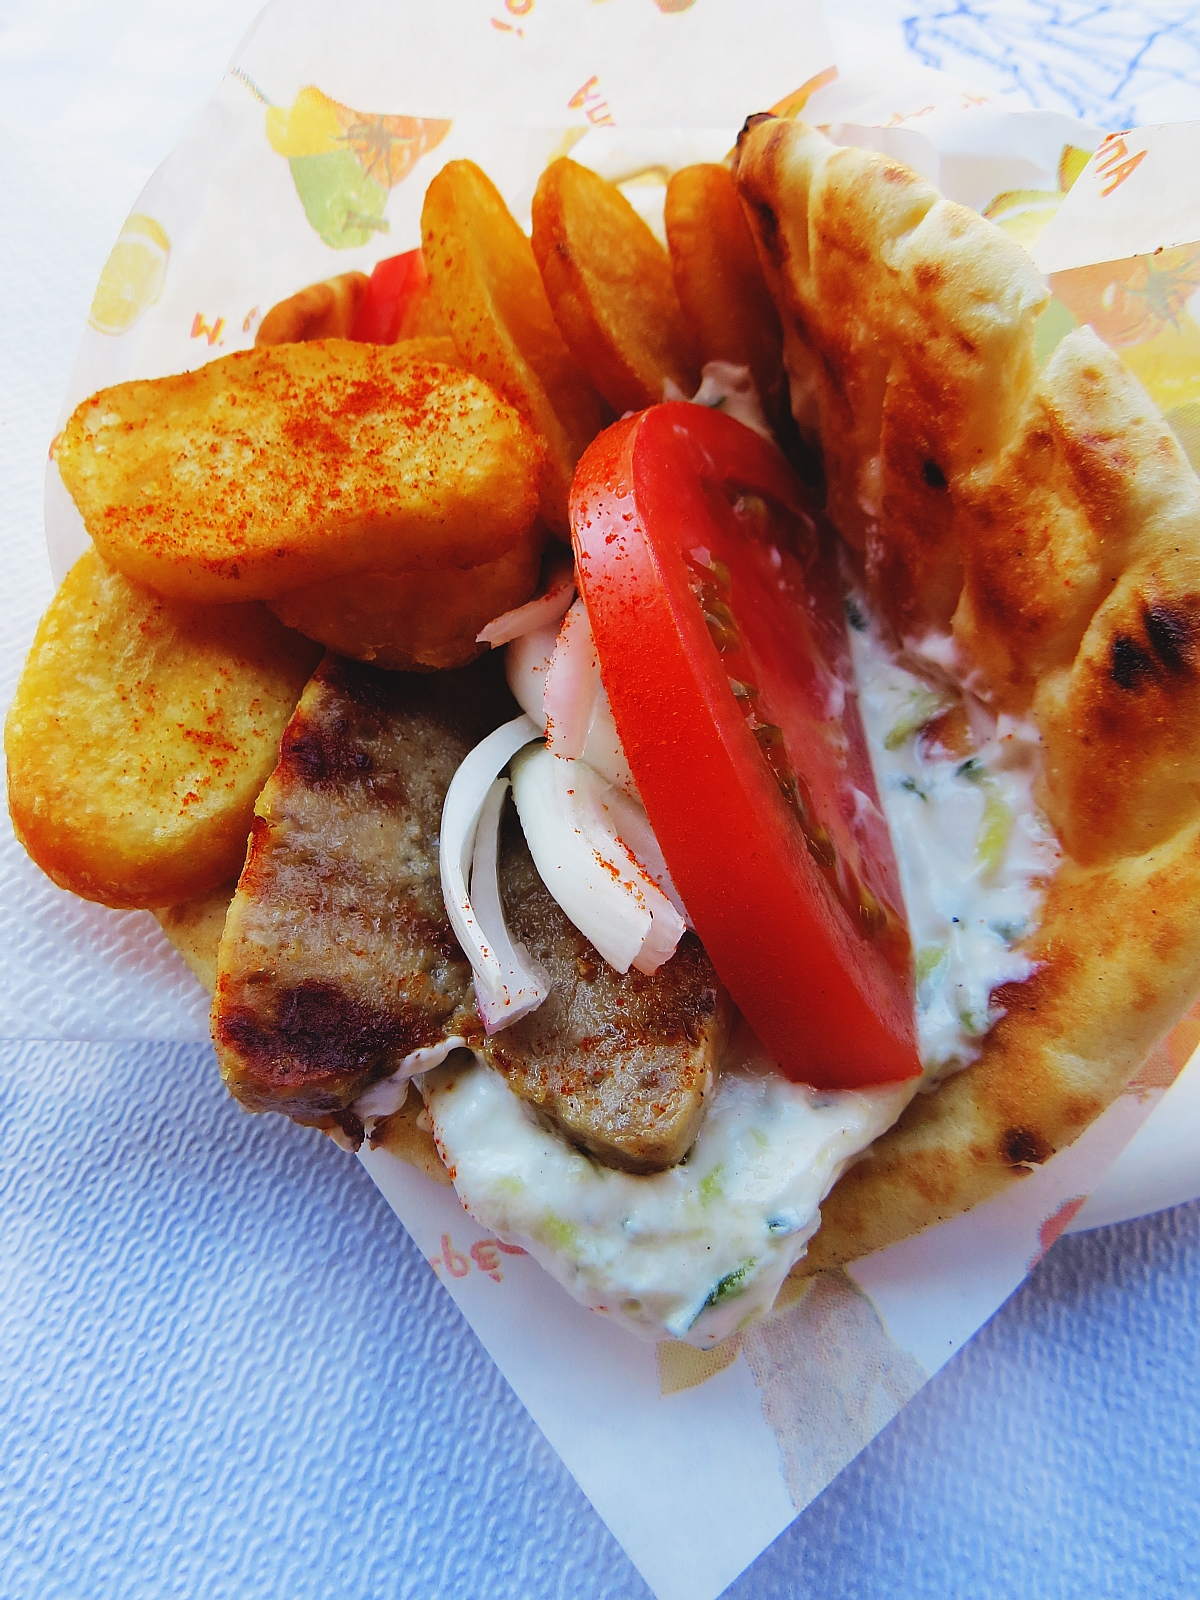 More Greek Food Dishes You Won't Want To Miss